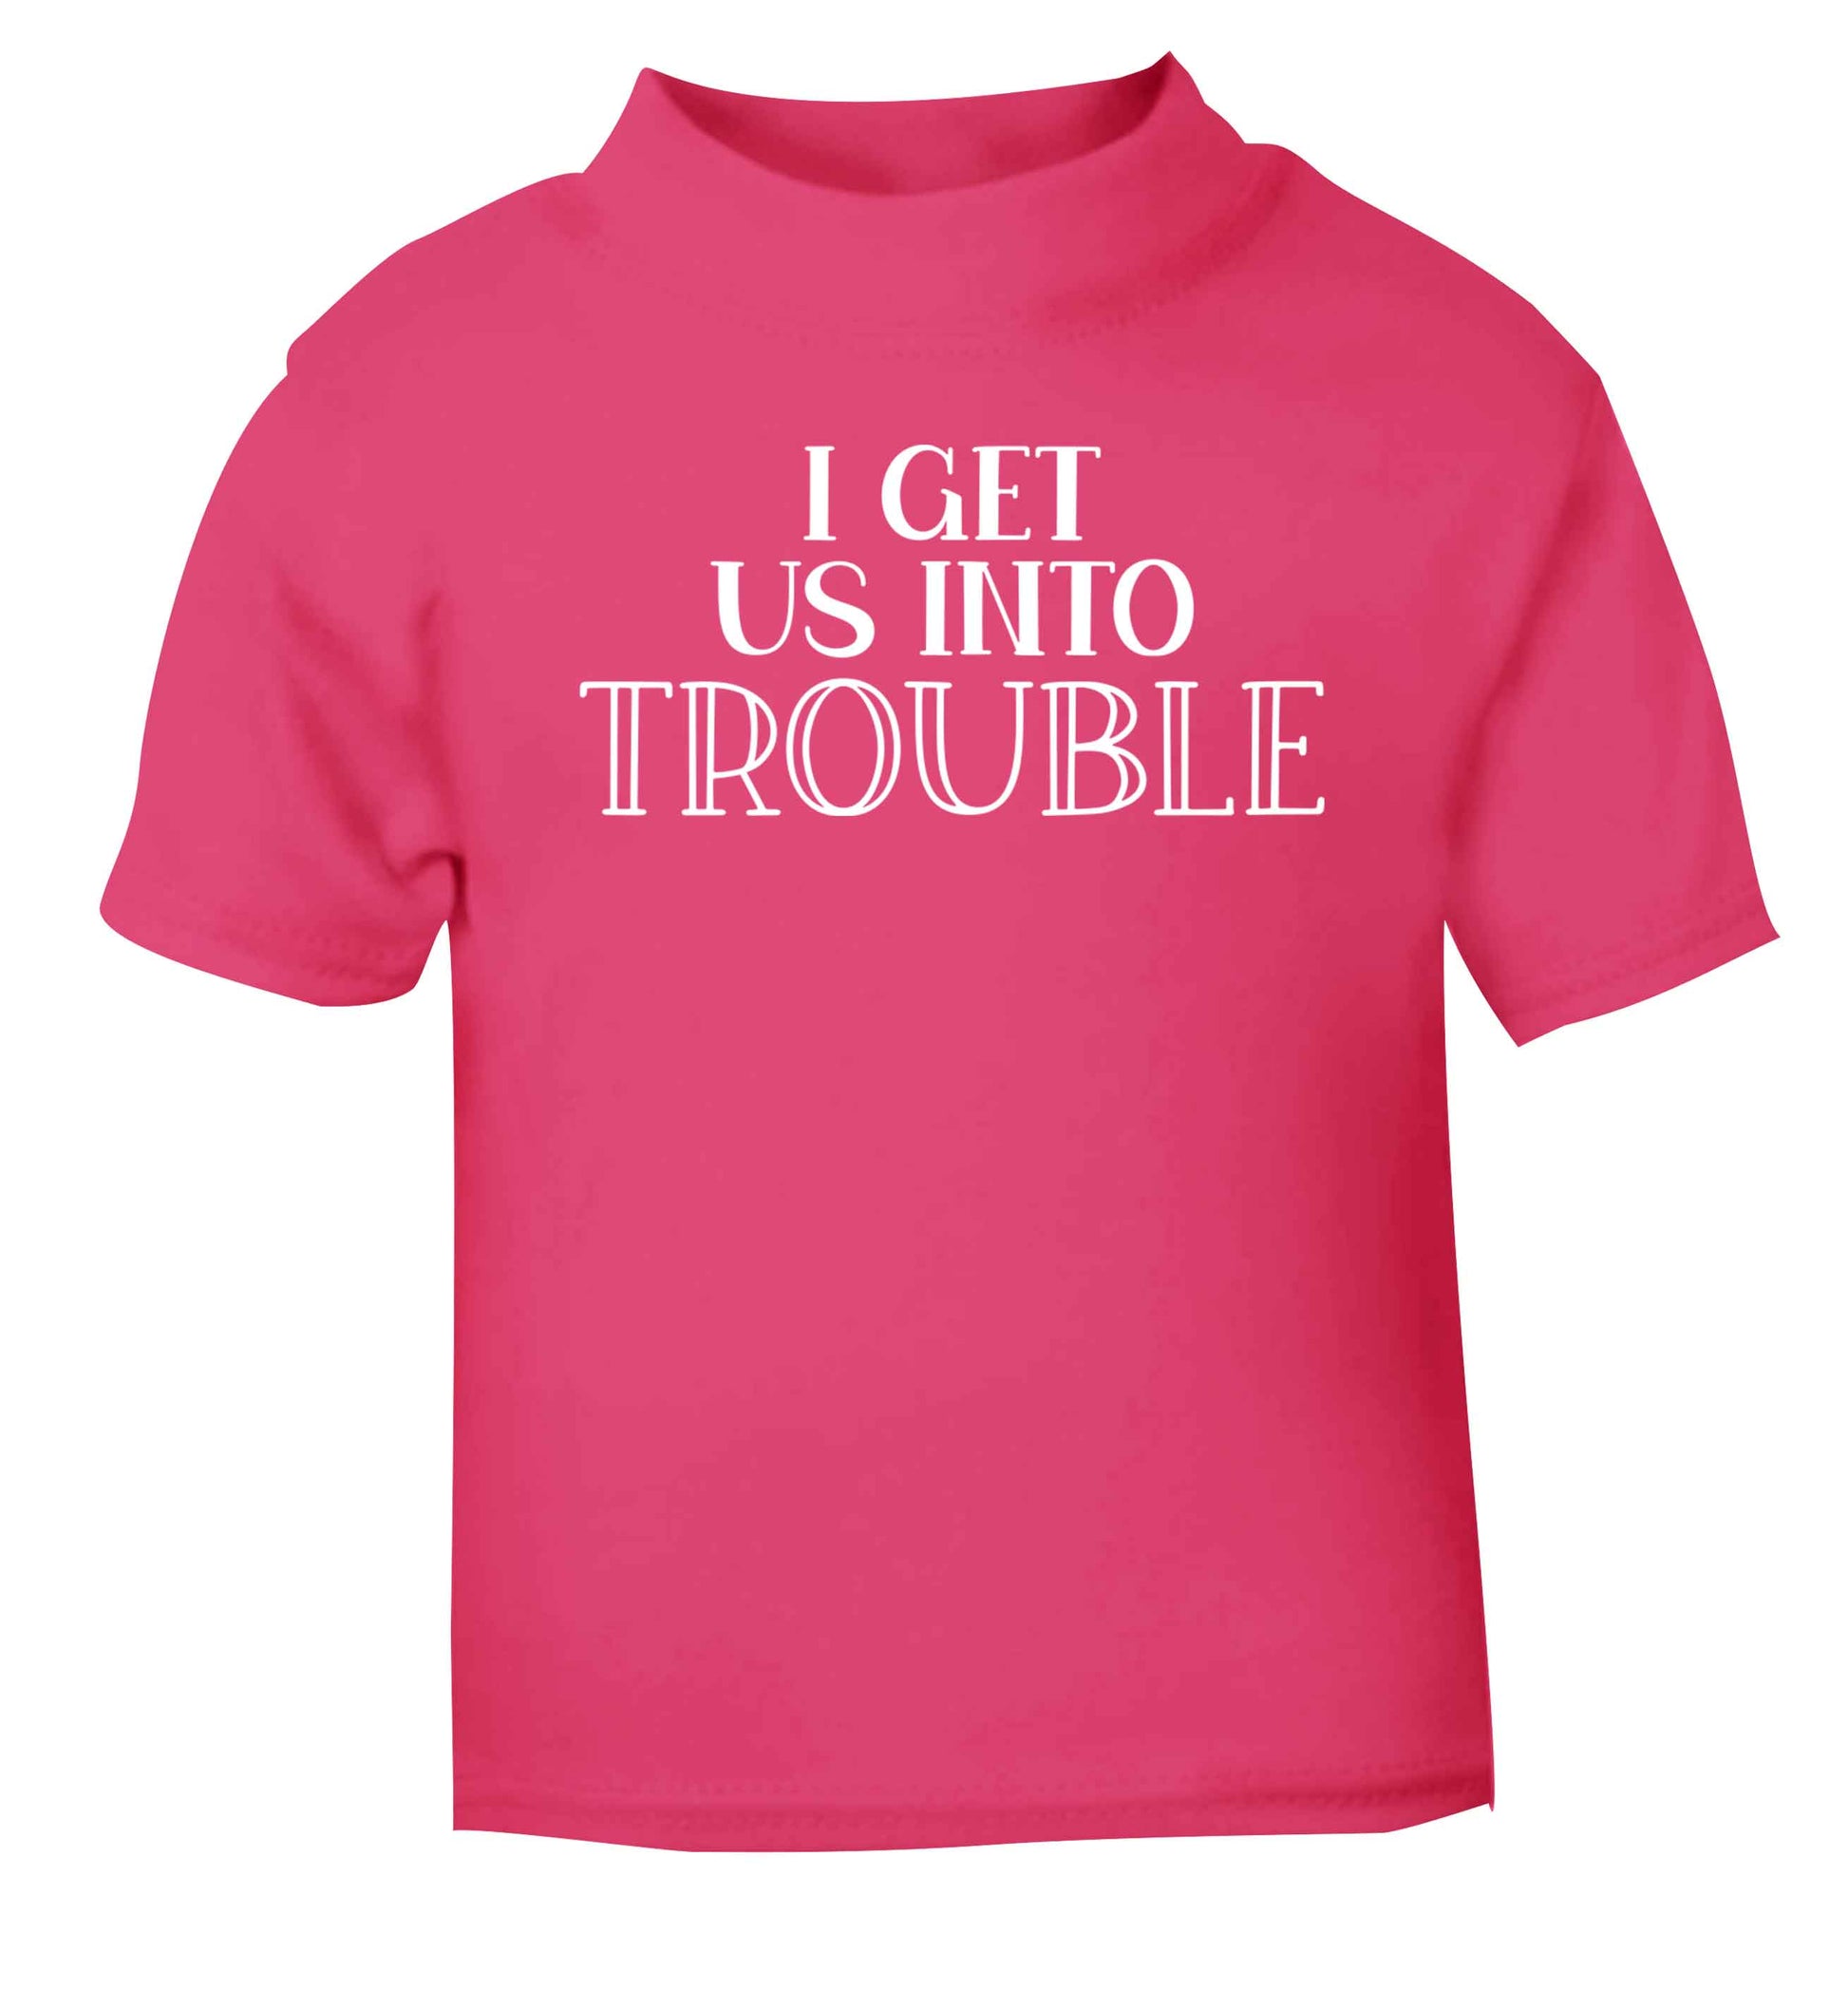 I get us into trouble pink baby toddler Tshirt 2 Years